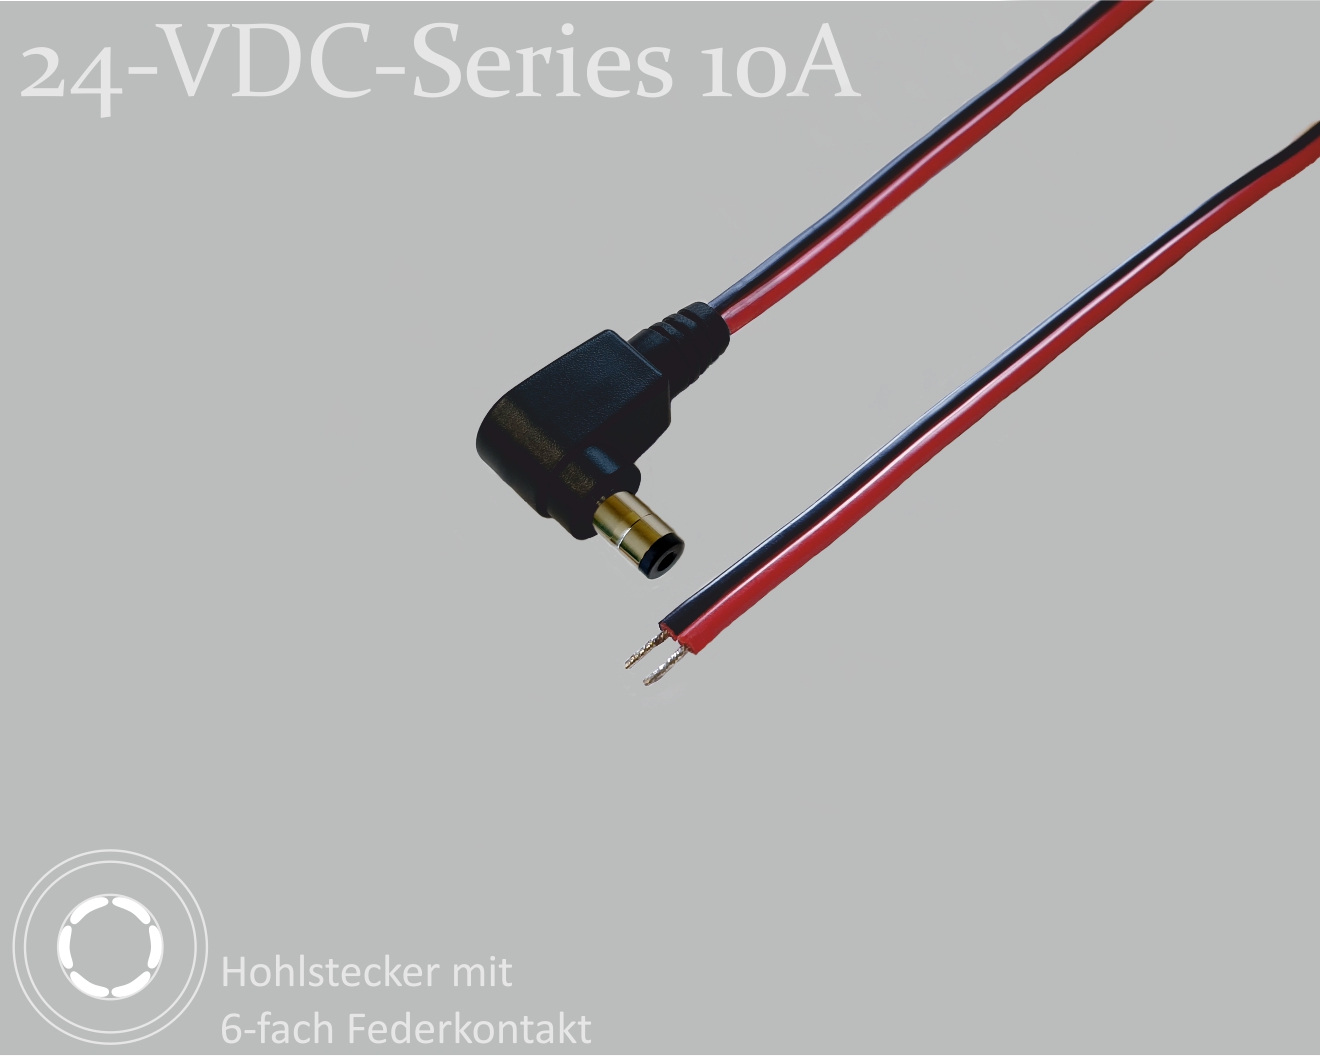 24-VDC-Series 10A, DC connection cable, DC right-angle plug with 4-spring contact 2.5x5.5x9.5mm, flat cable 2x0.75mm², red/black, tinned ends, 0.75m